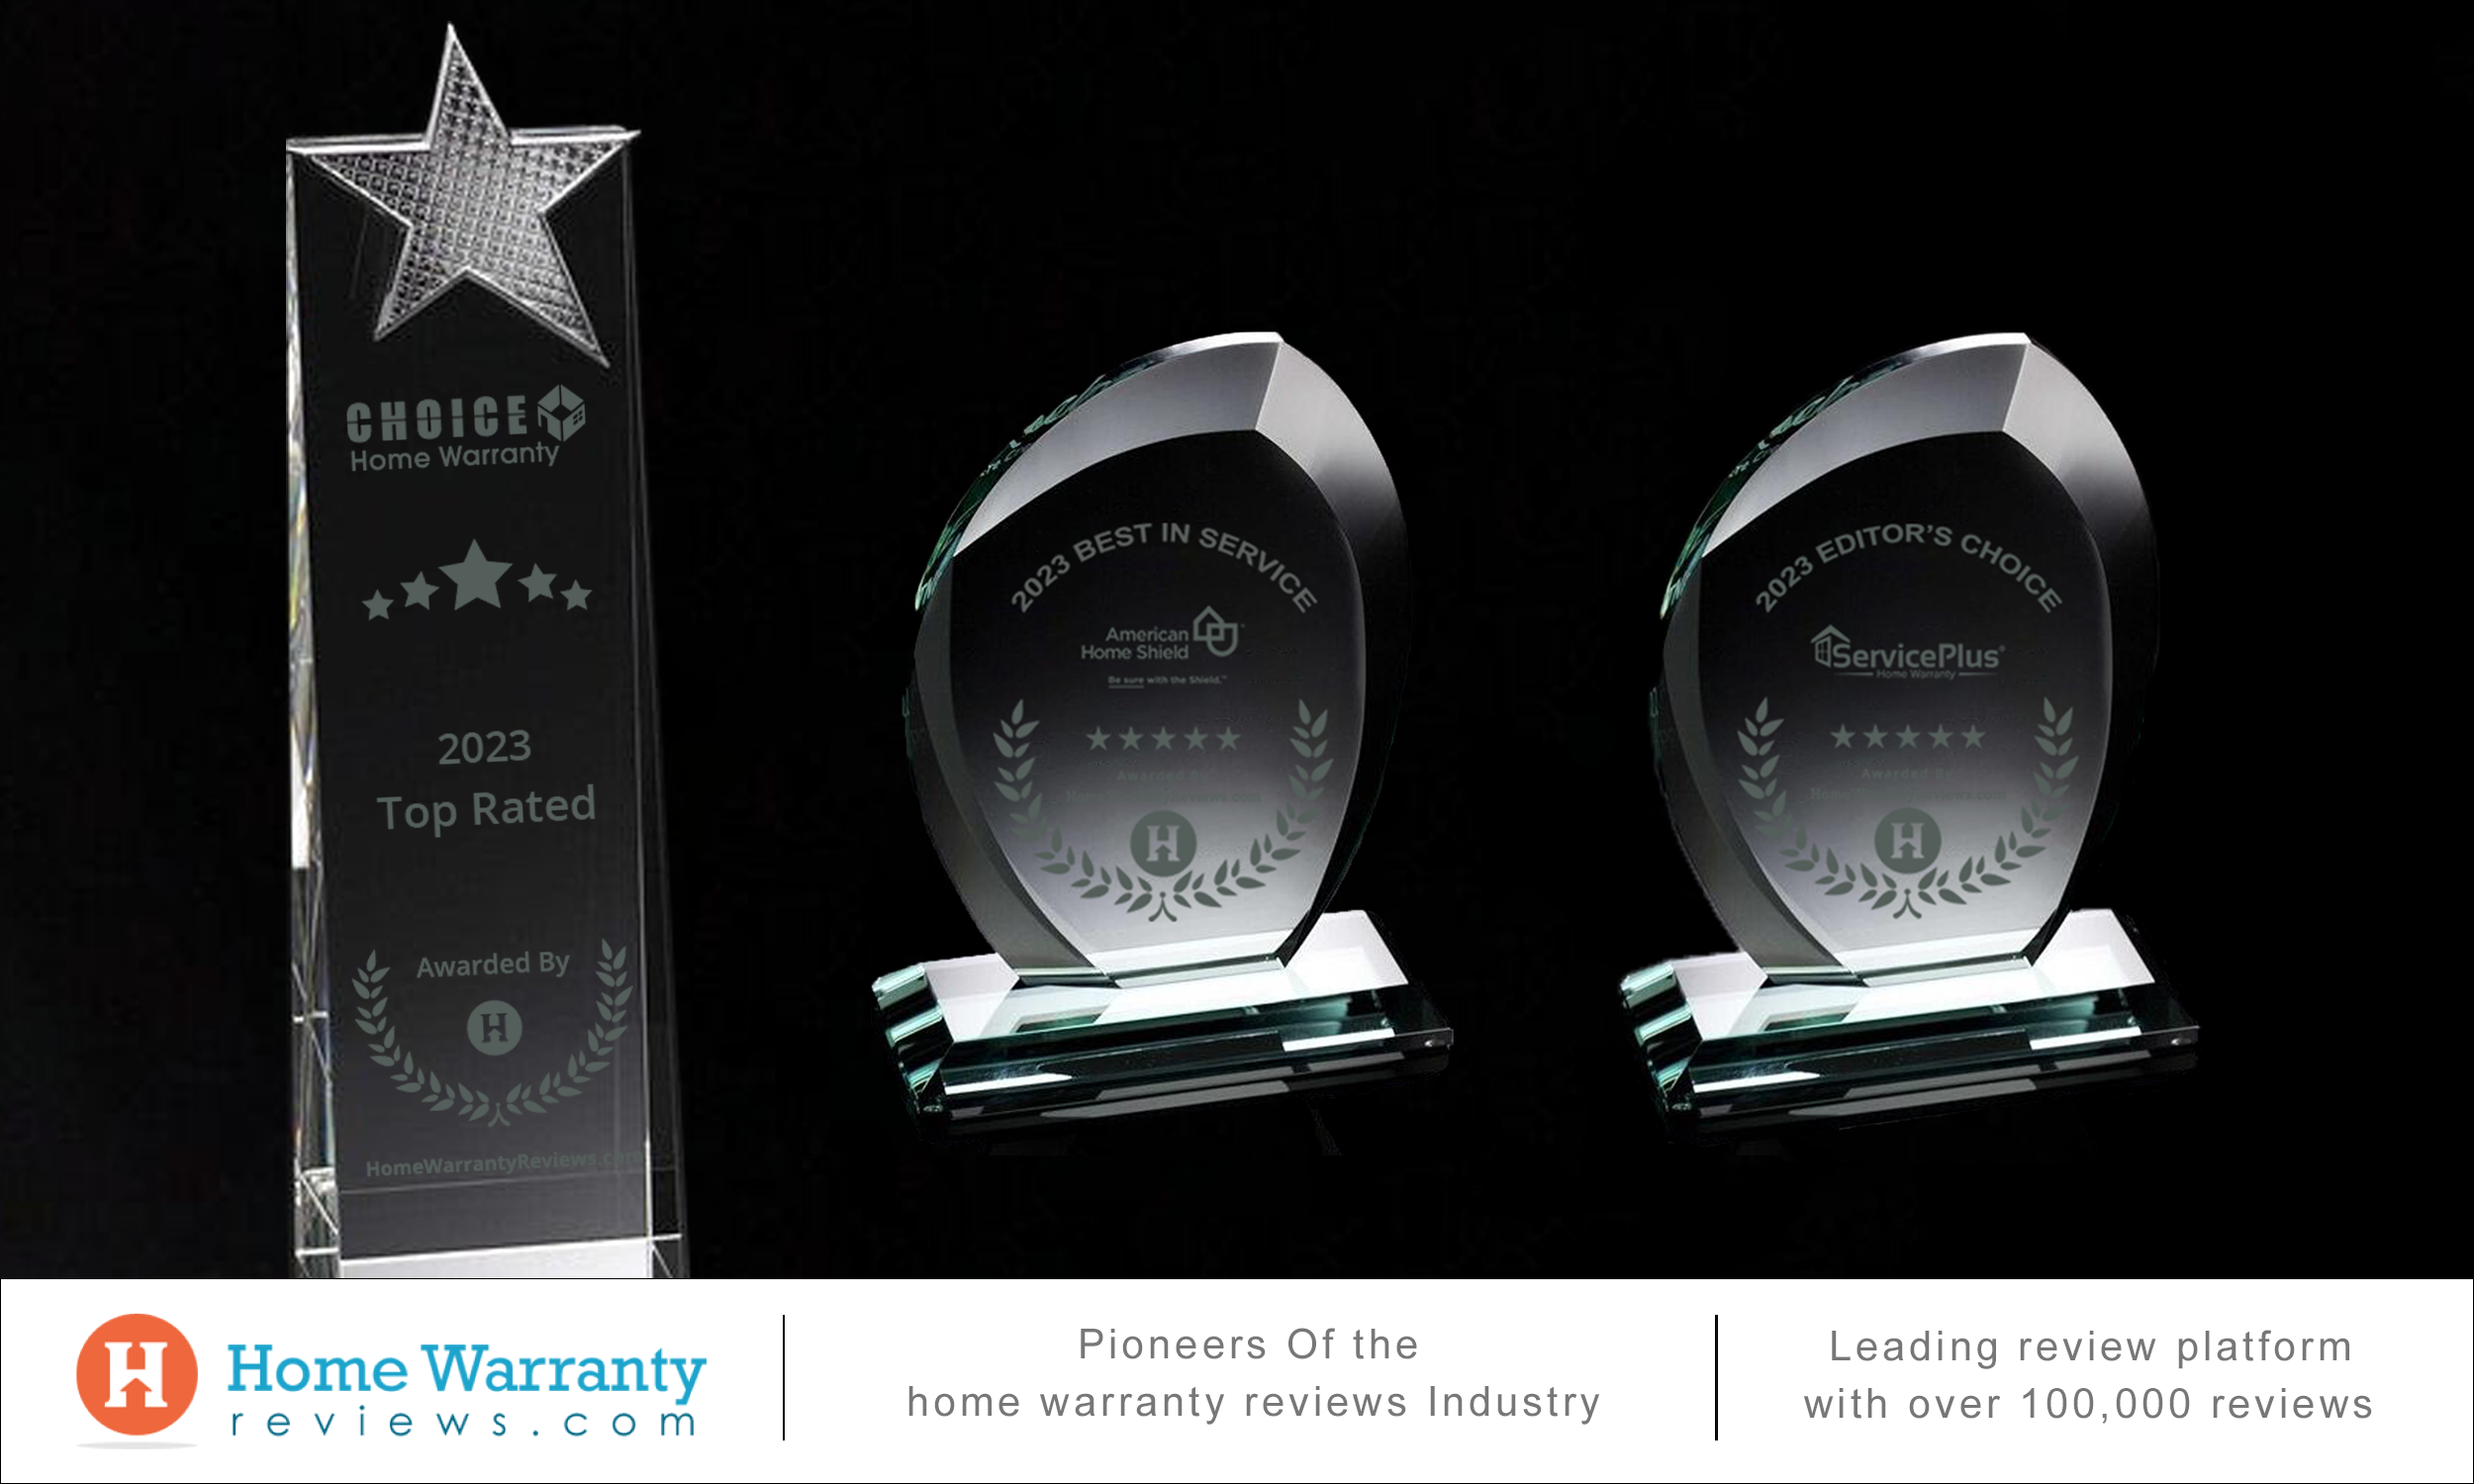 an image displaying the winners of <a href='https://www.homewarrantyreviews.com/'>HomeWarrantyReviews.com</a> awards for the year 2023 recognizing the best home warranty companies.